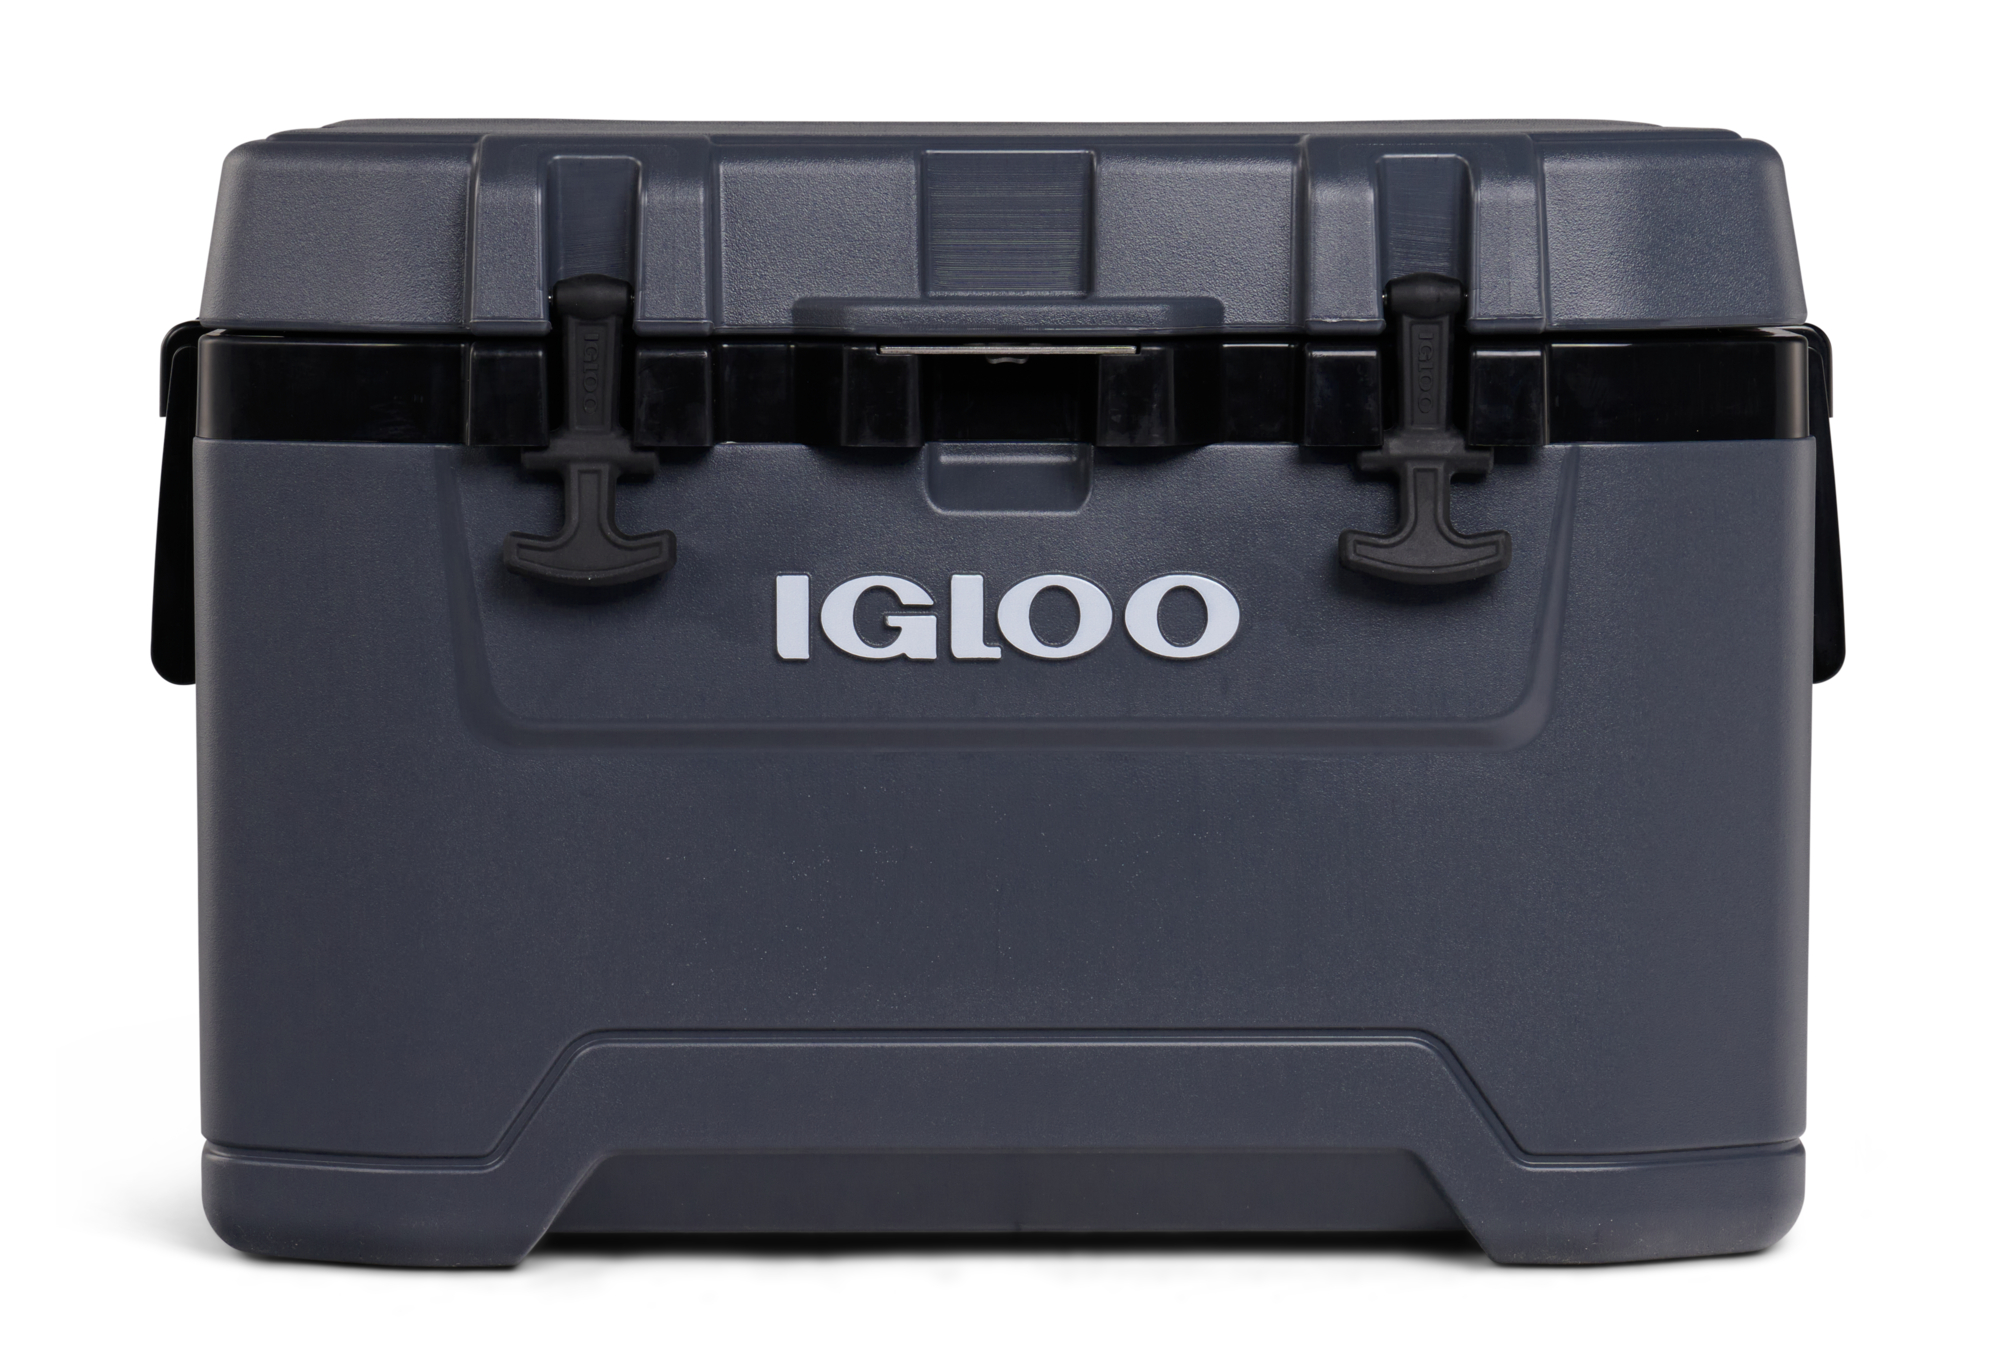 Igloo Overland 52 QT Ice Chest Cooler with Wheels, Gray (26" x 19" x 16") - image 5 of 17